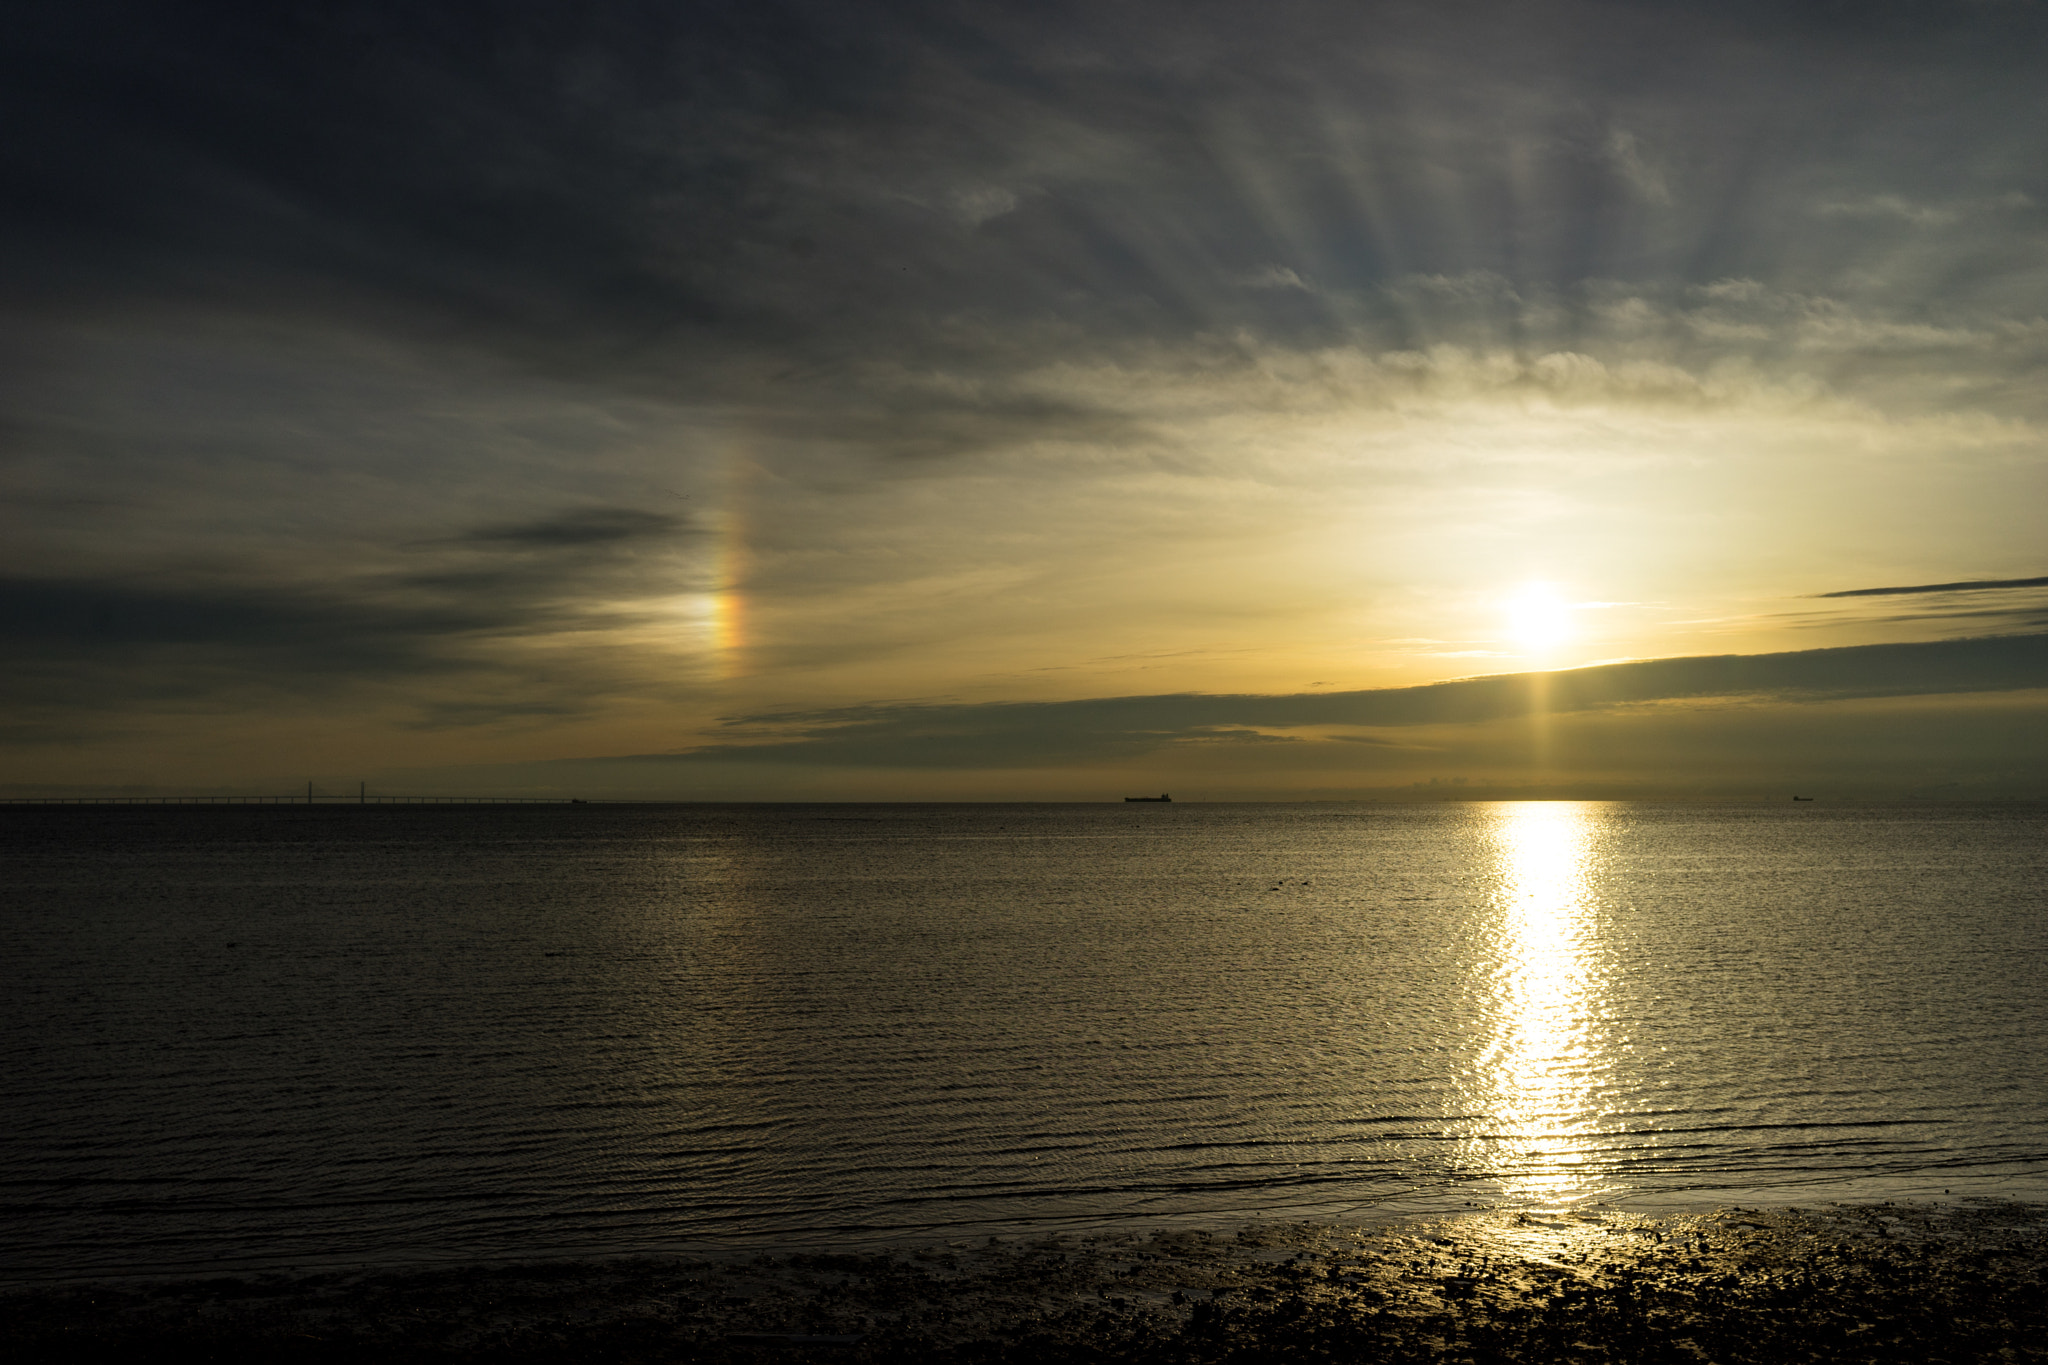 Sony a7 II sample photo. A beautiful sundog last night at sunset caused by clouds if ice crystals in the upper atmosphere photography